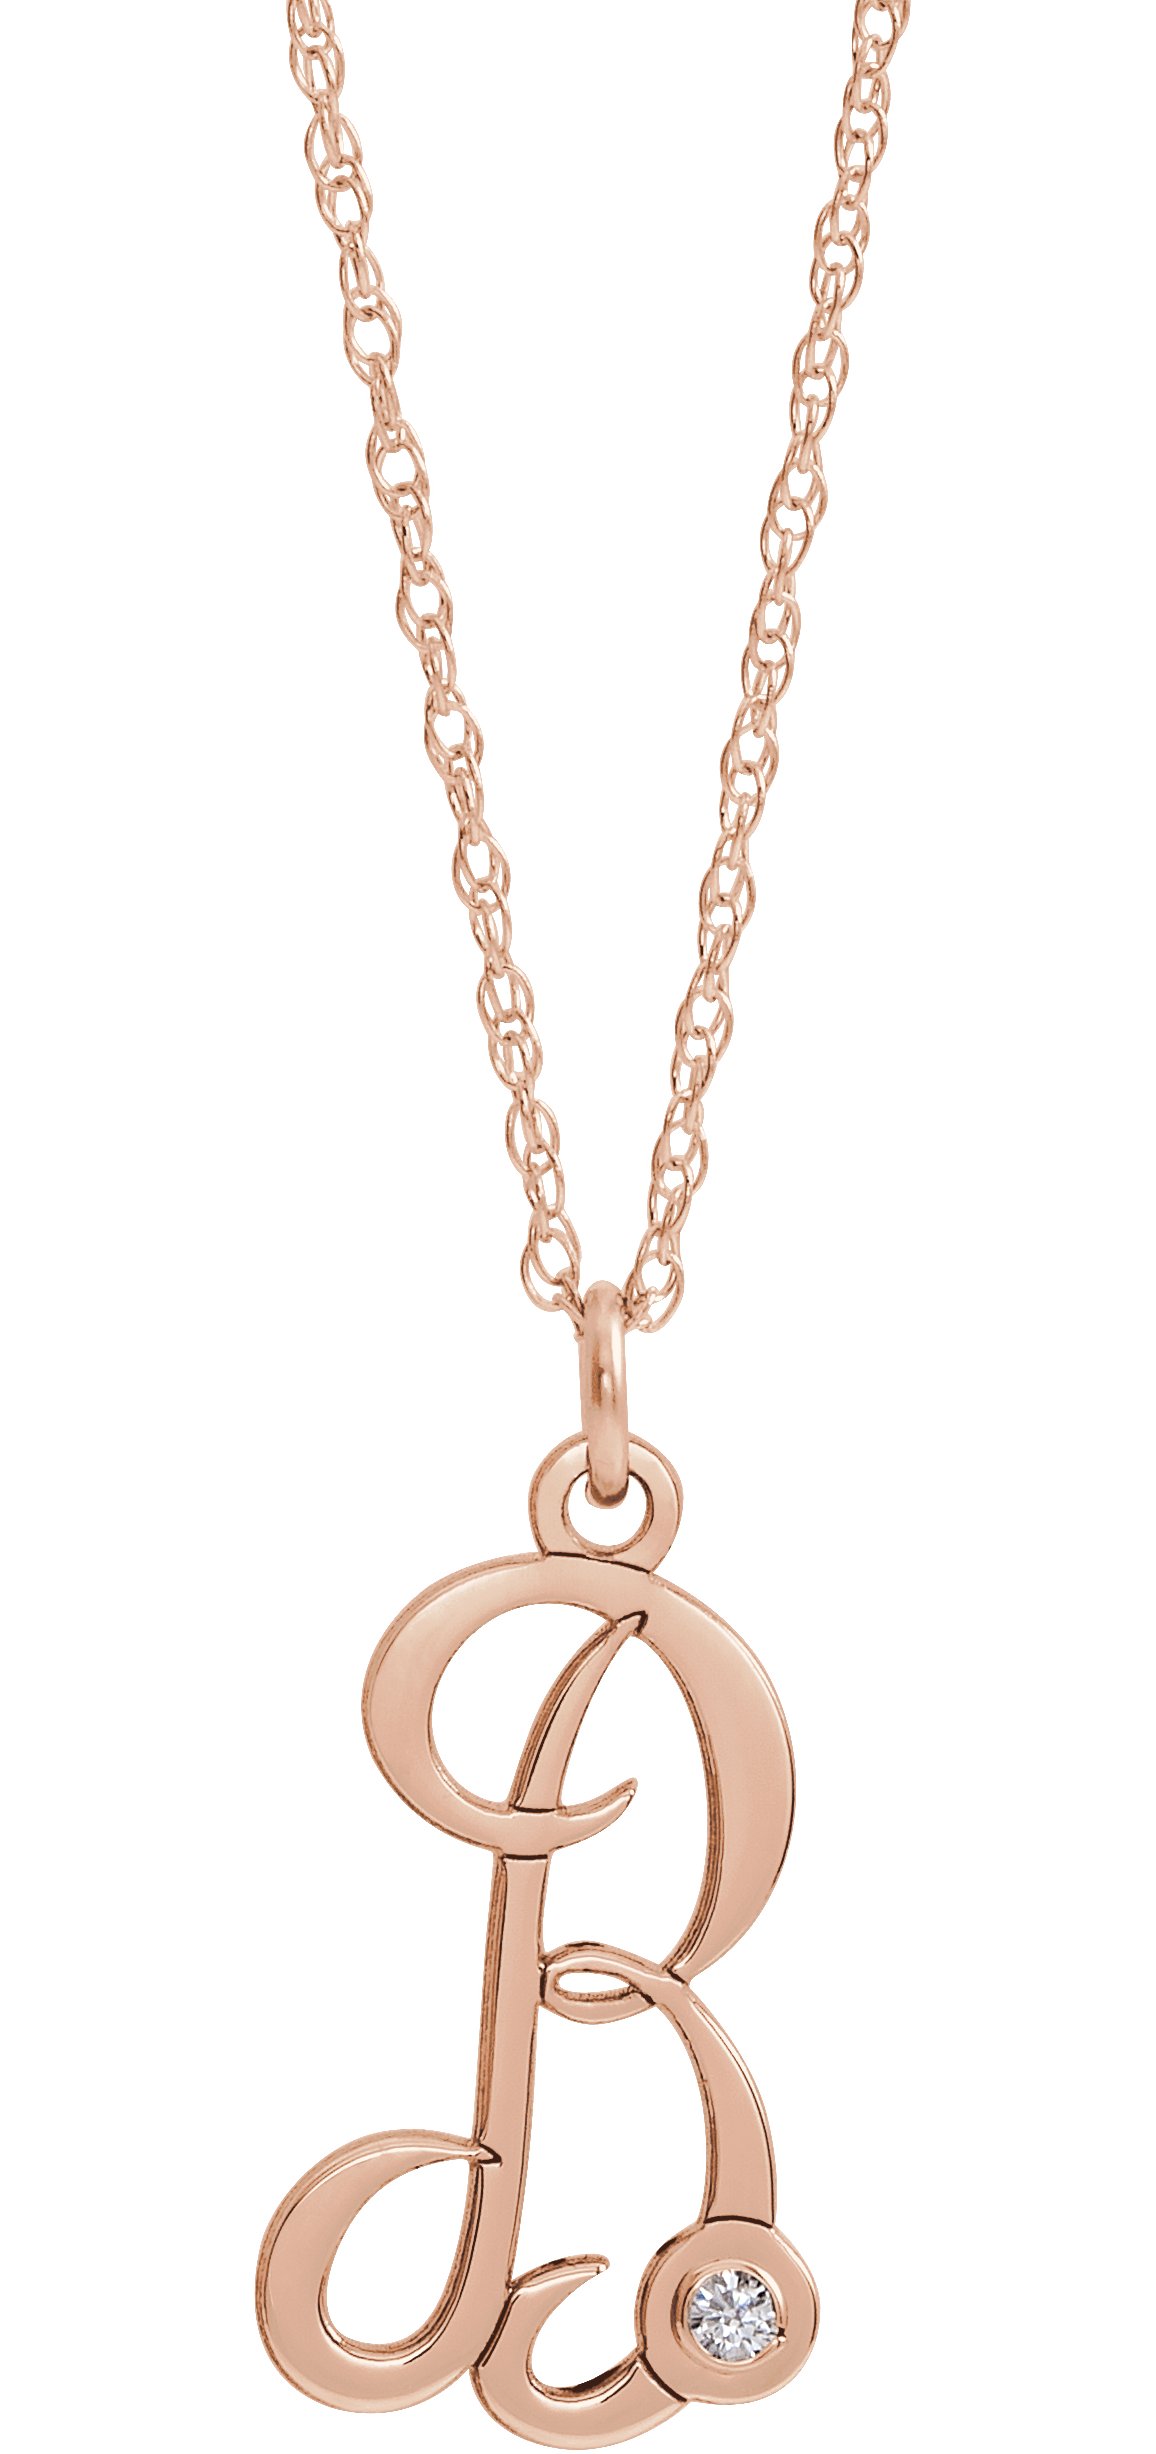 14K Rose Gold-Plated Sterling Silver .02 CT Diamond Script Initial B 16-18" Necklace